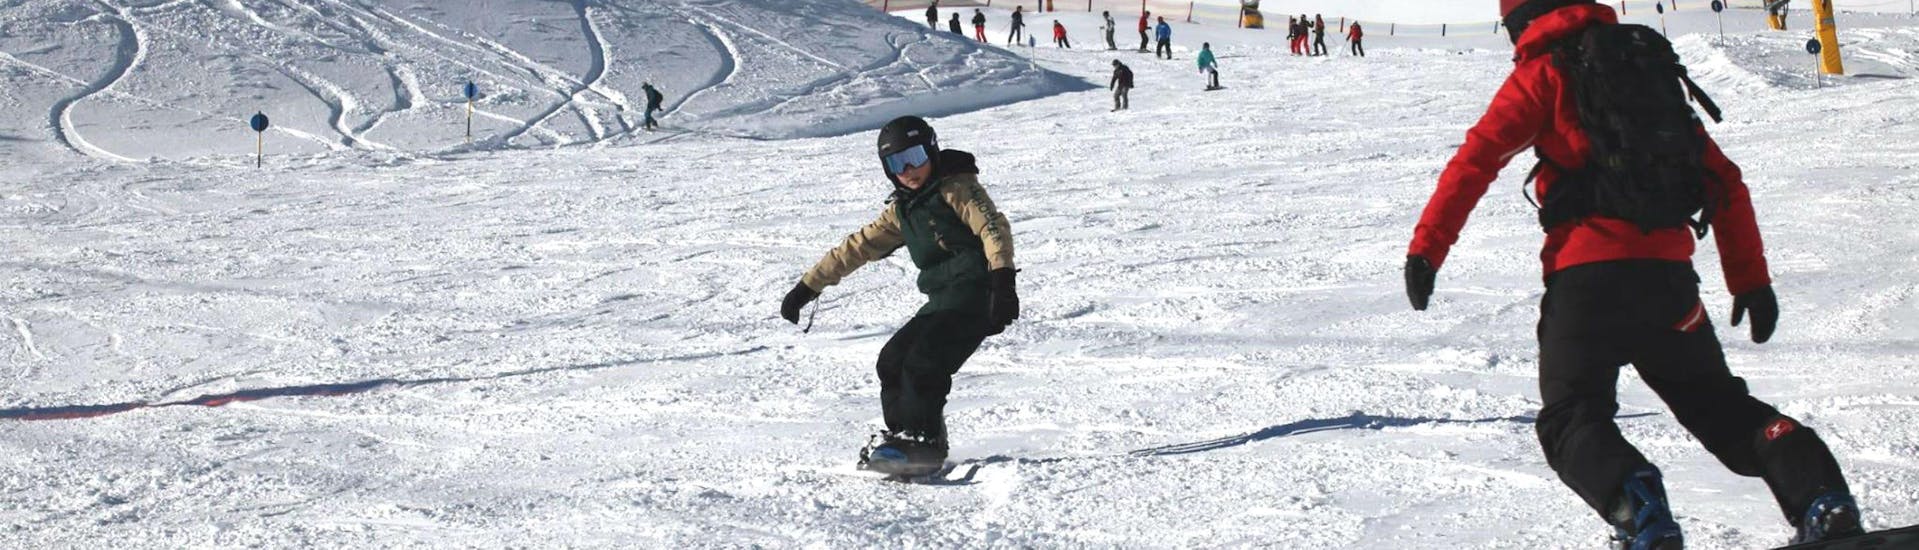 A young snowboarder is practicing his front and backside turns during his Snowboarding Lessons for Kids "All-Inclusive" (9-15 years) with the ski school Ski- und Snowboardschule Vacancia.